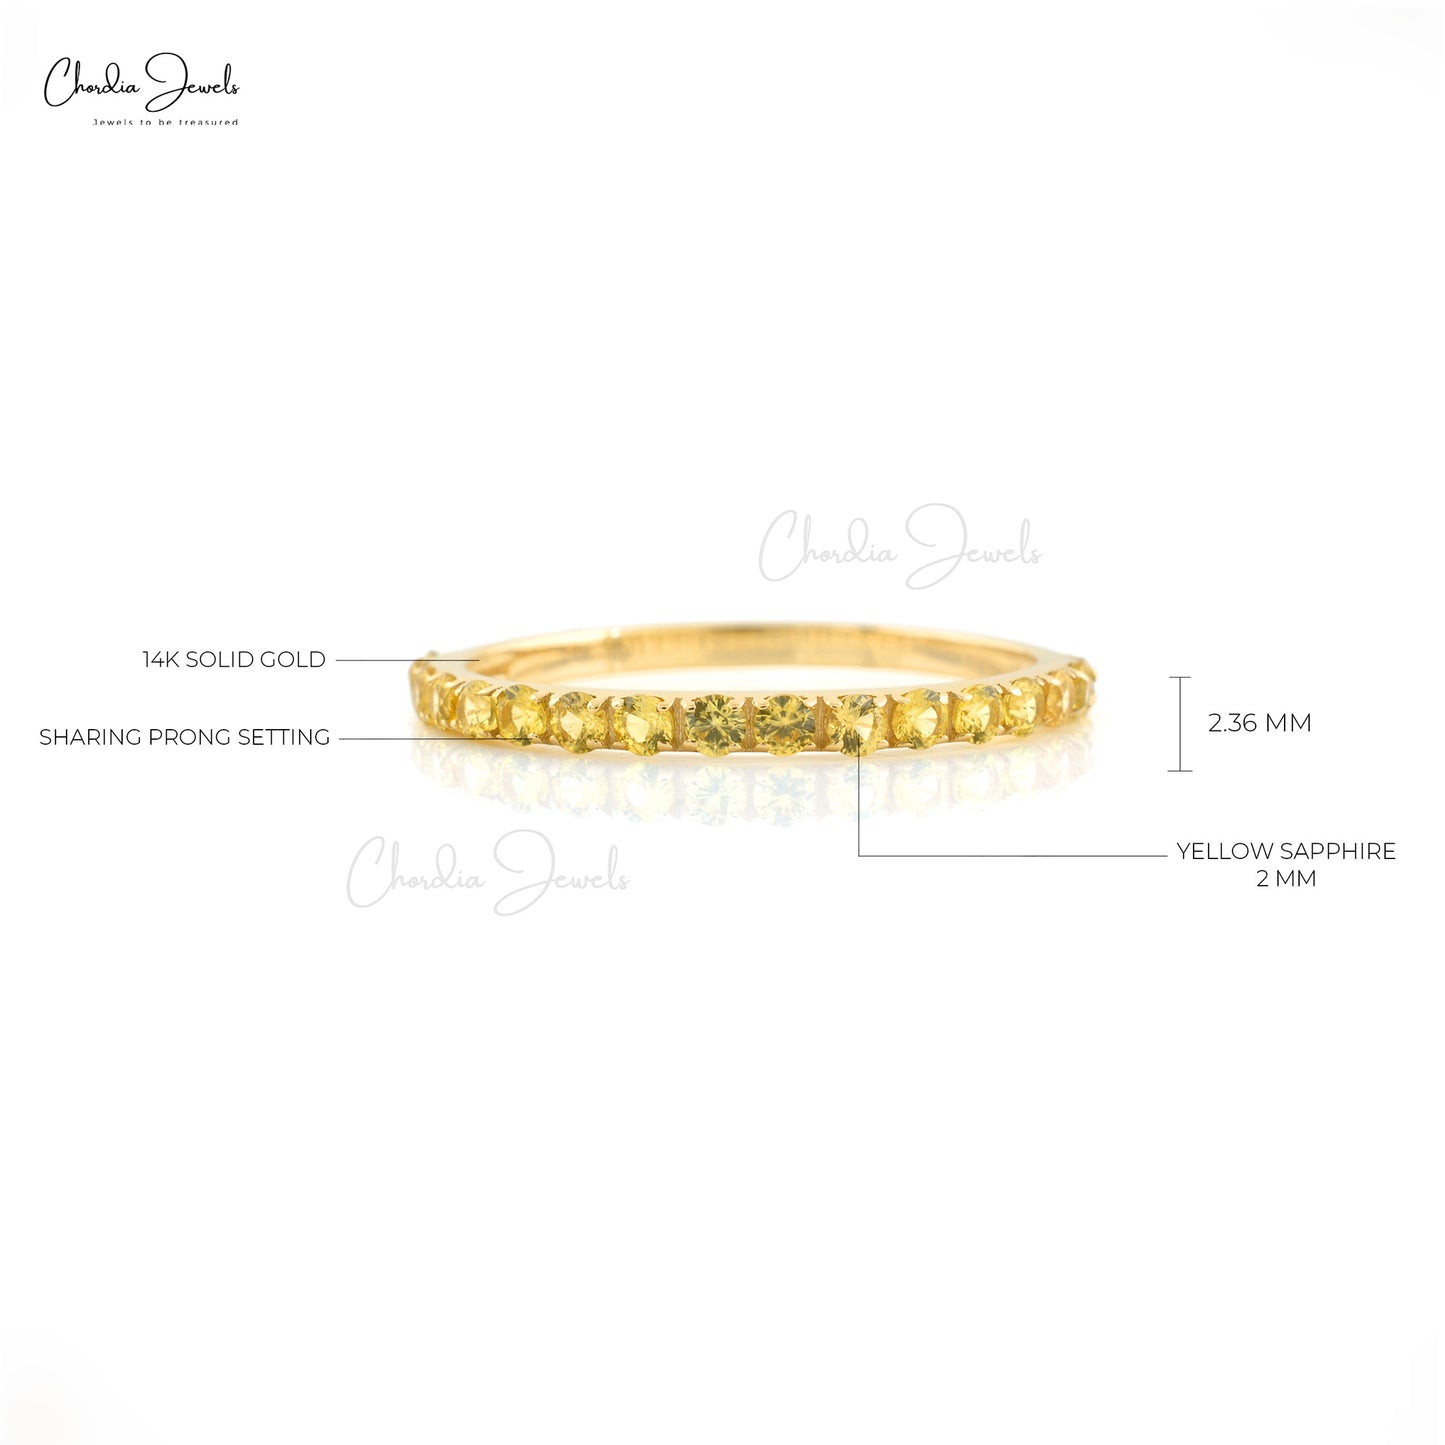 Natural 2mm Round Cut Yellow Sapphire Half Eternity Band For Anniversary, 0.51 Carat Gemstone Band Ring, 14k Solid Yellow Gold Ring For Her